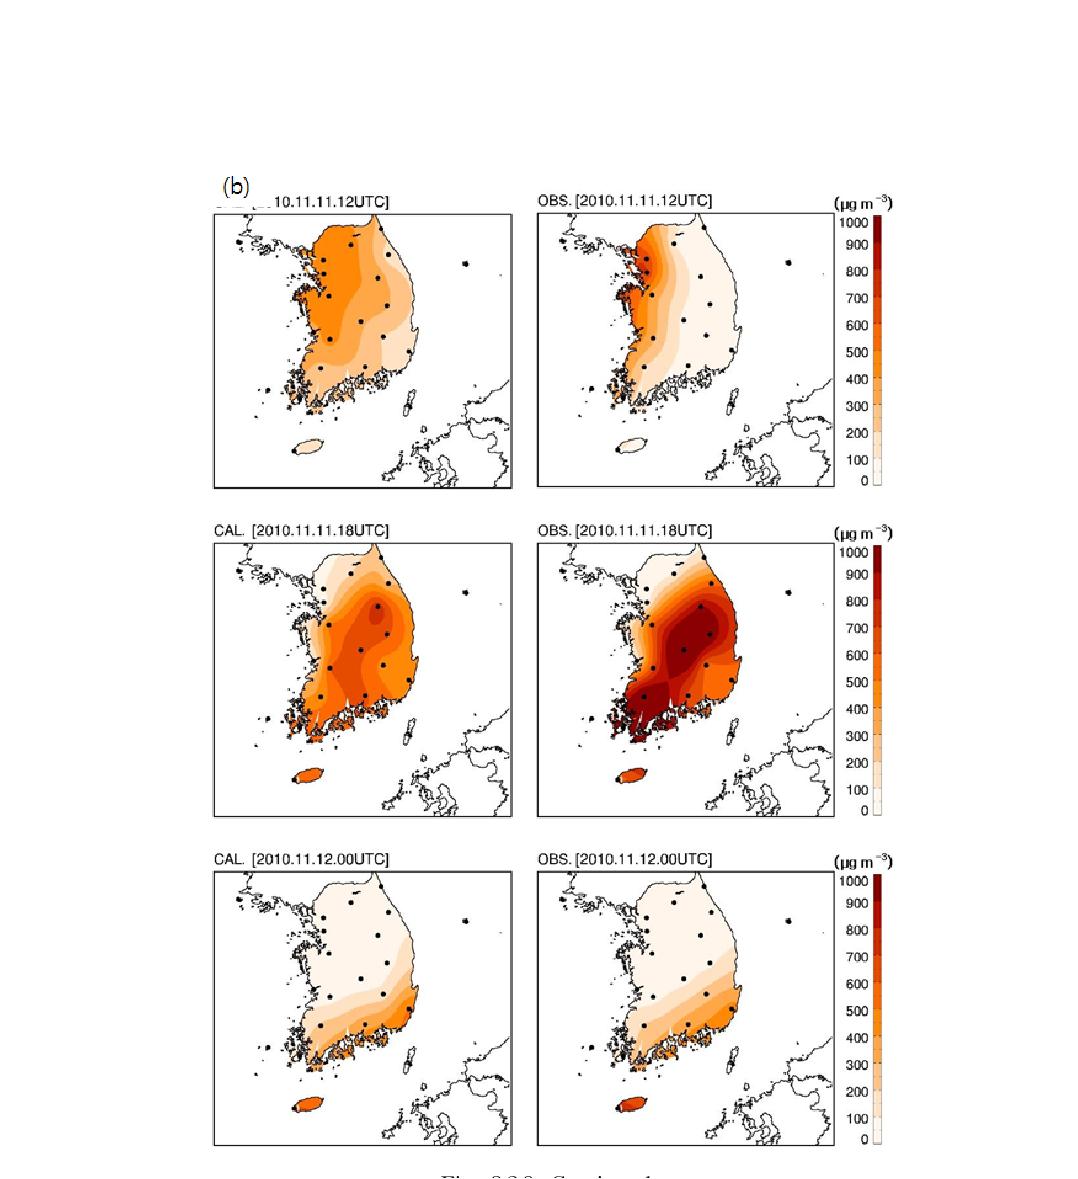 Spatial distributions of observed (left) and calculated PM10 concentration (right) at (a) 12 UTC, 15 UTC and 18 UTC 20 March 2010 during the 5th Asian dust case of 2010, (b) 12 UTC, 18 UTC, 11 Nov. and 00 UTC 12 November 2010 during the 12th Asian dust case of 2010.